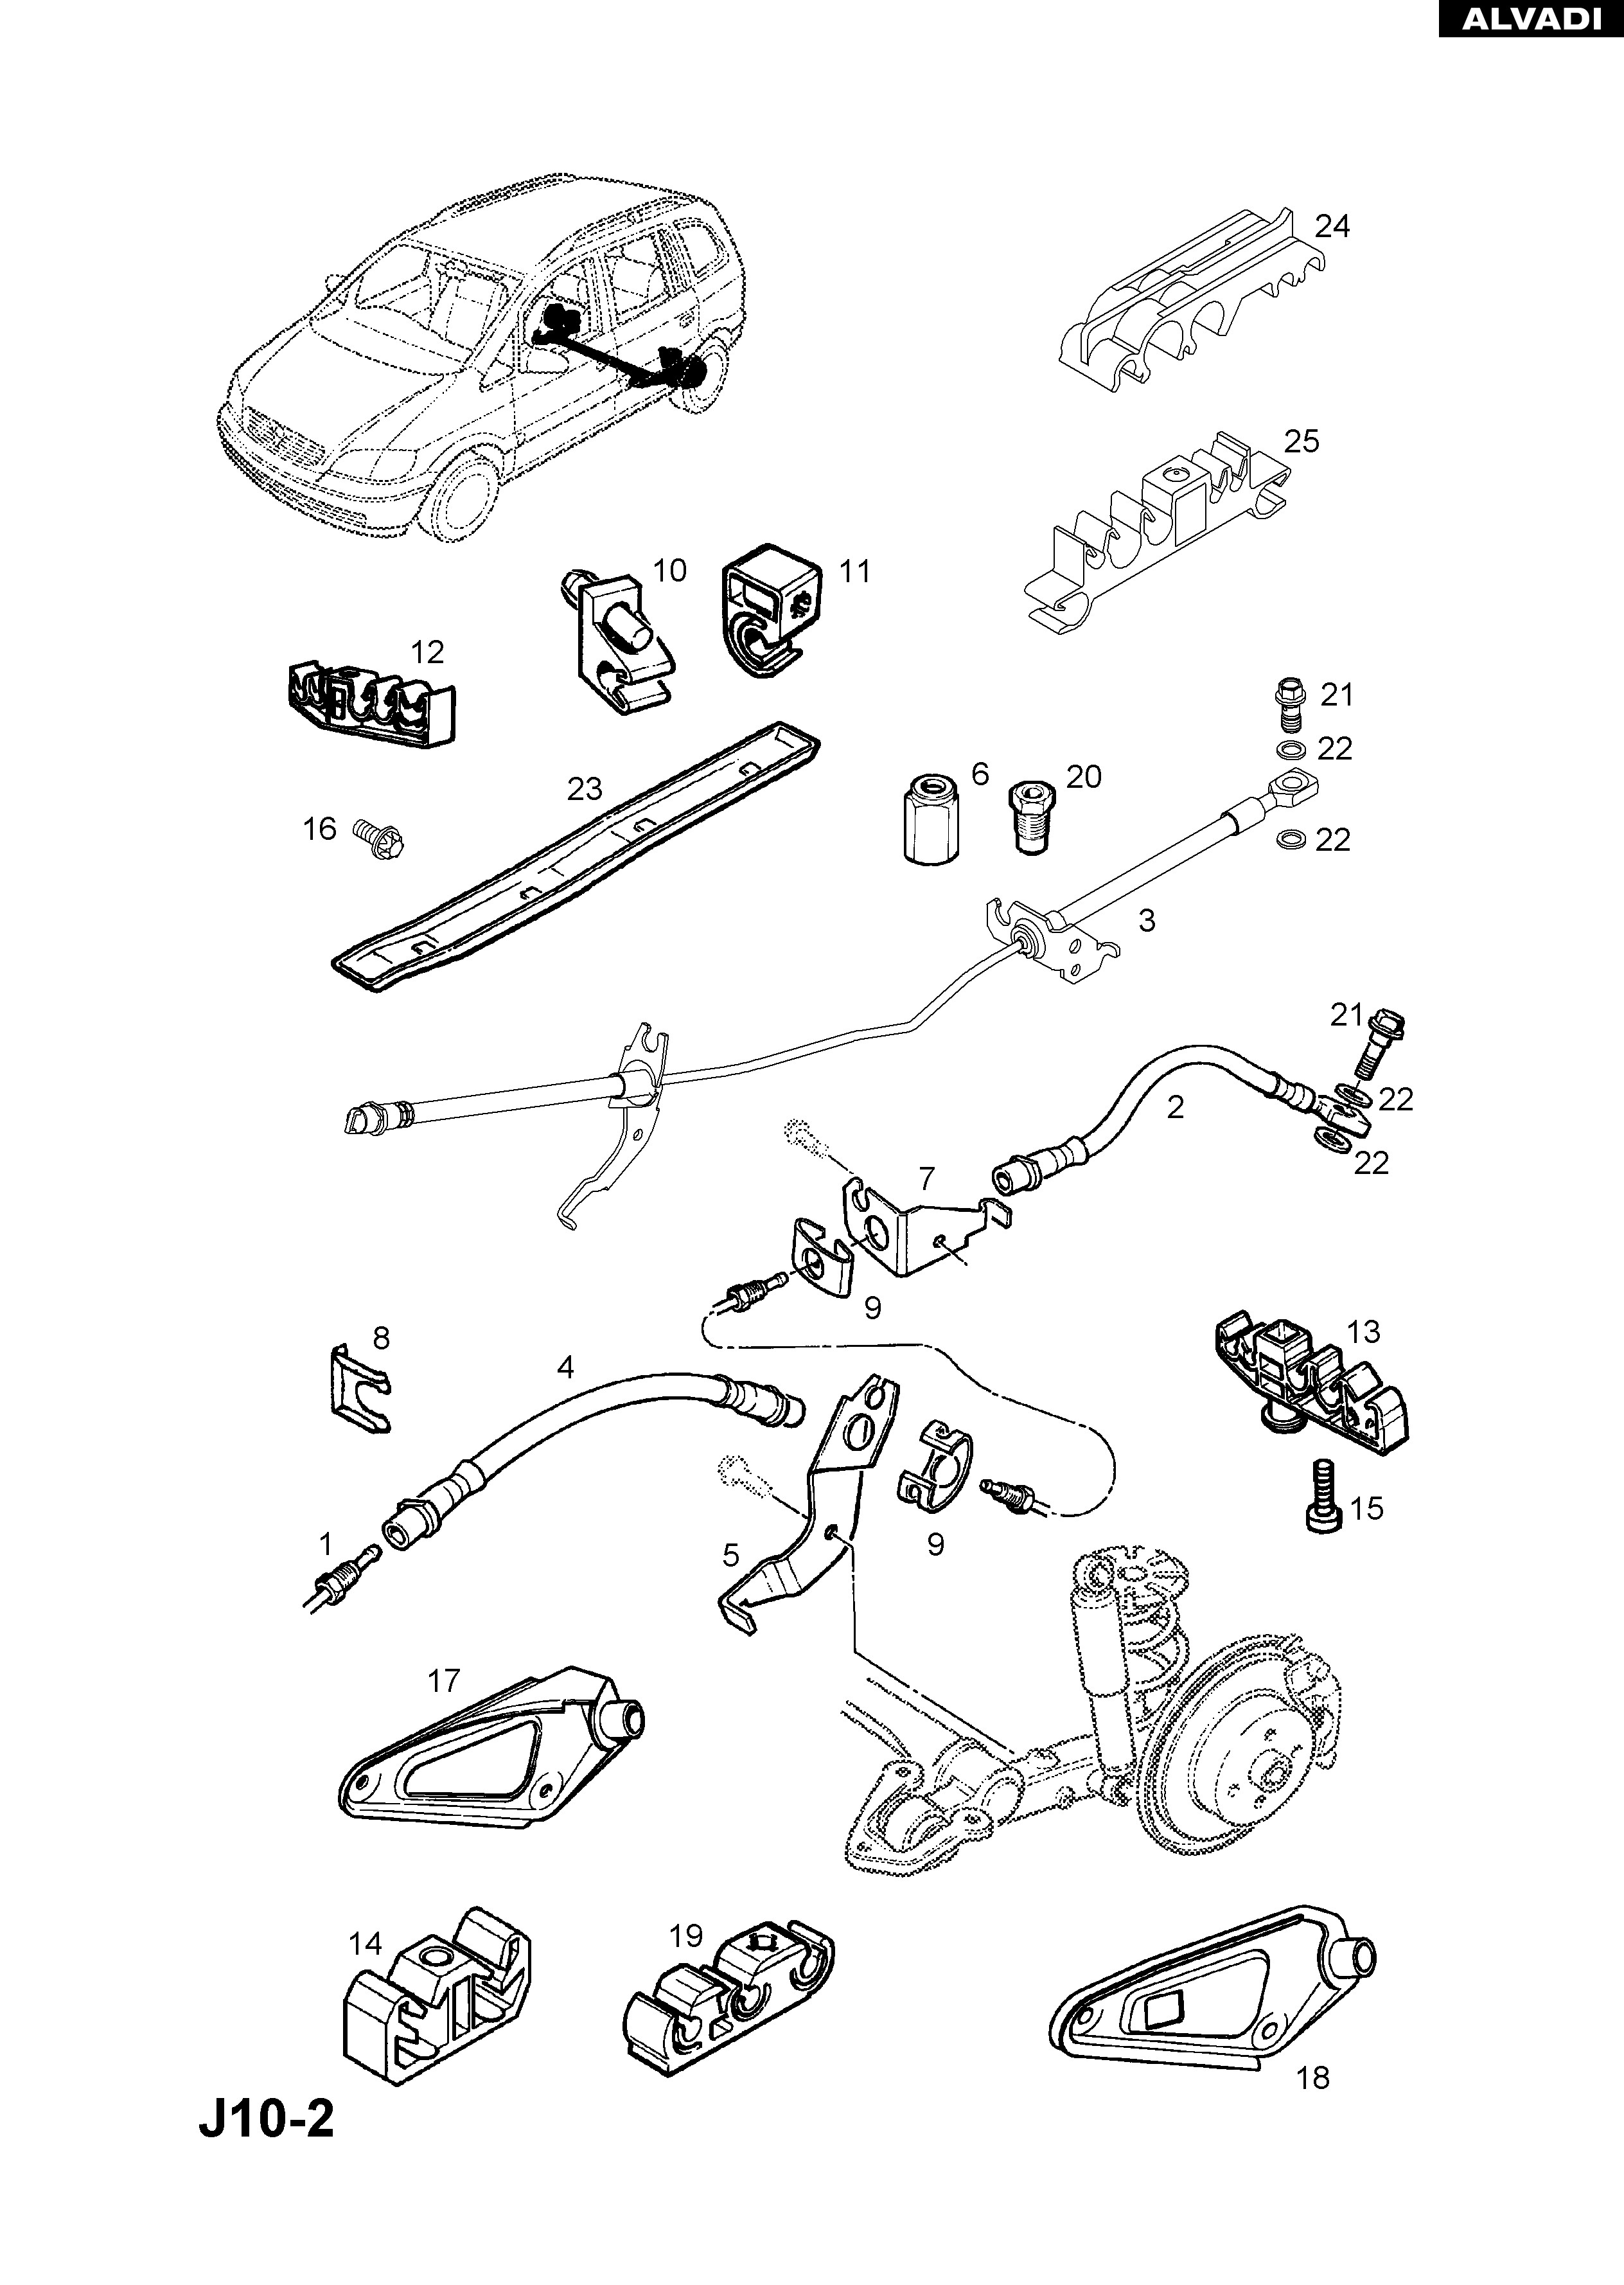 Rear Brake System Diagram Opel Brake Pipes and Hoses Contd Of Rear Brake System Diagram